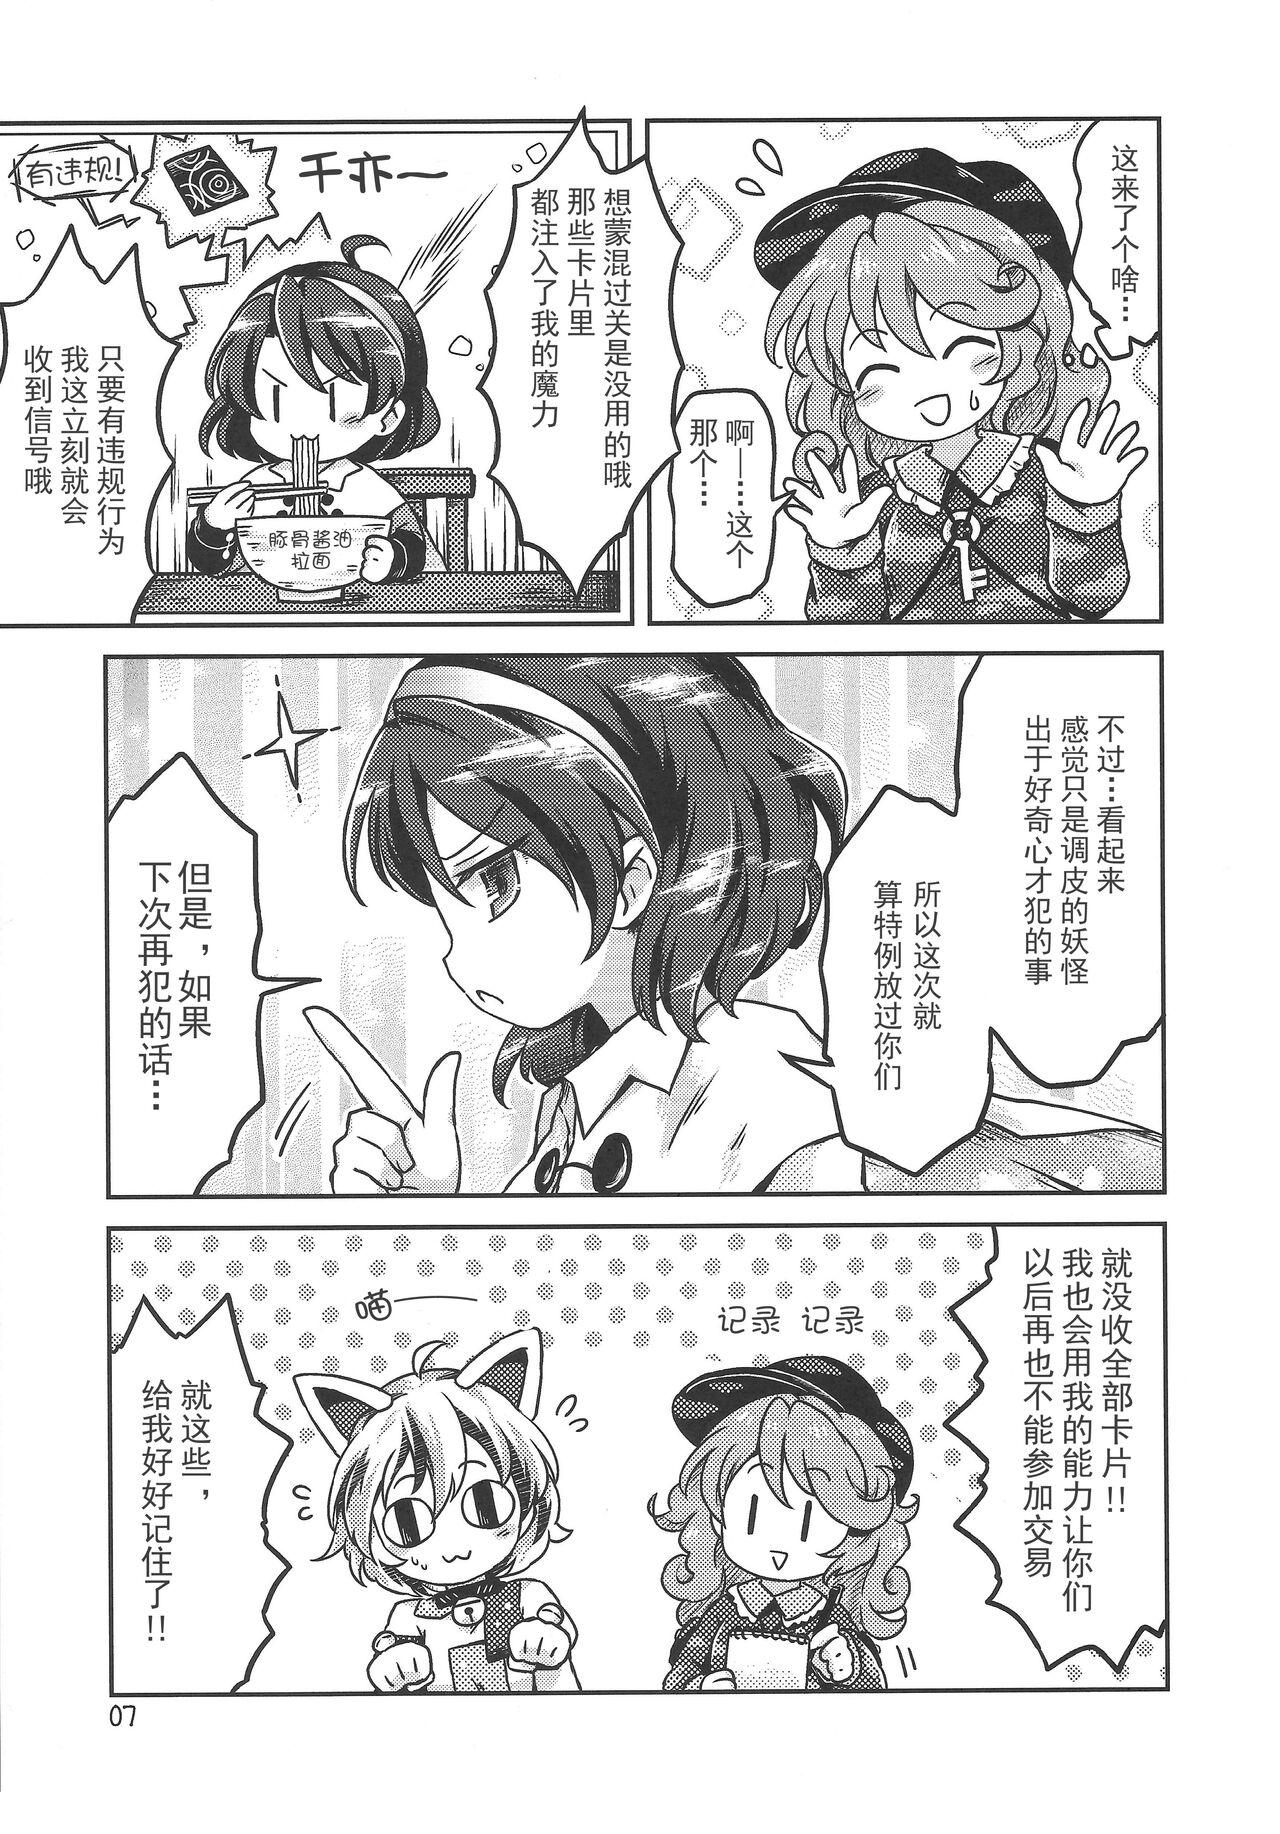 Cbt 《千亦酱的活动日志》 - Touhou project Gay Cumjerkingoff - Page 7